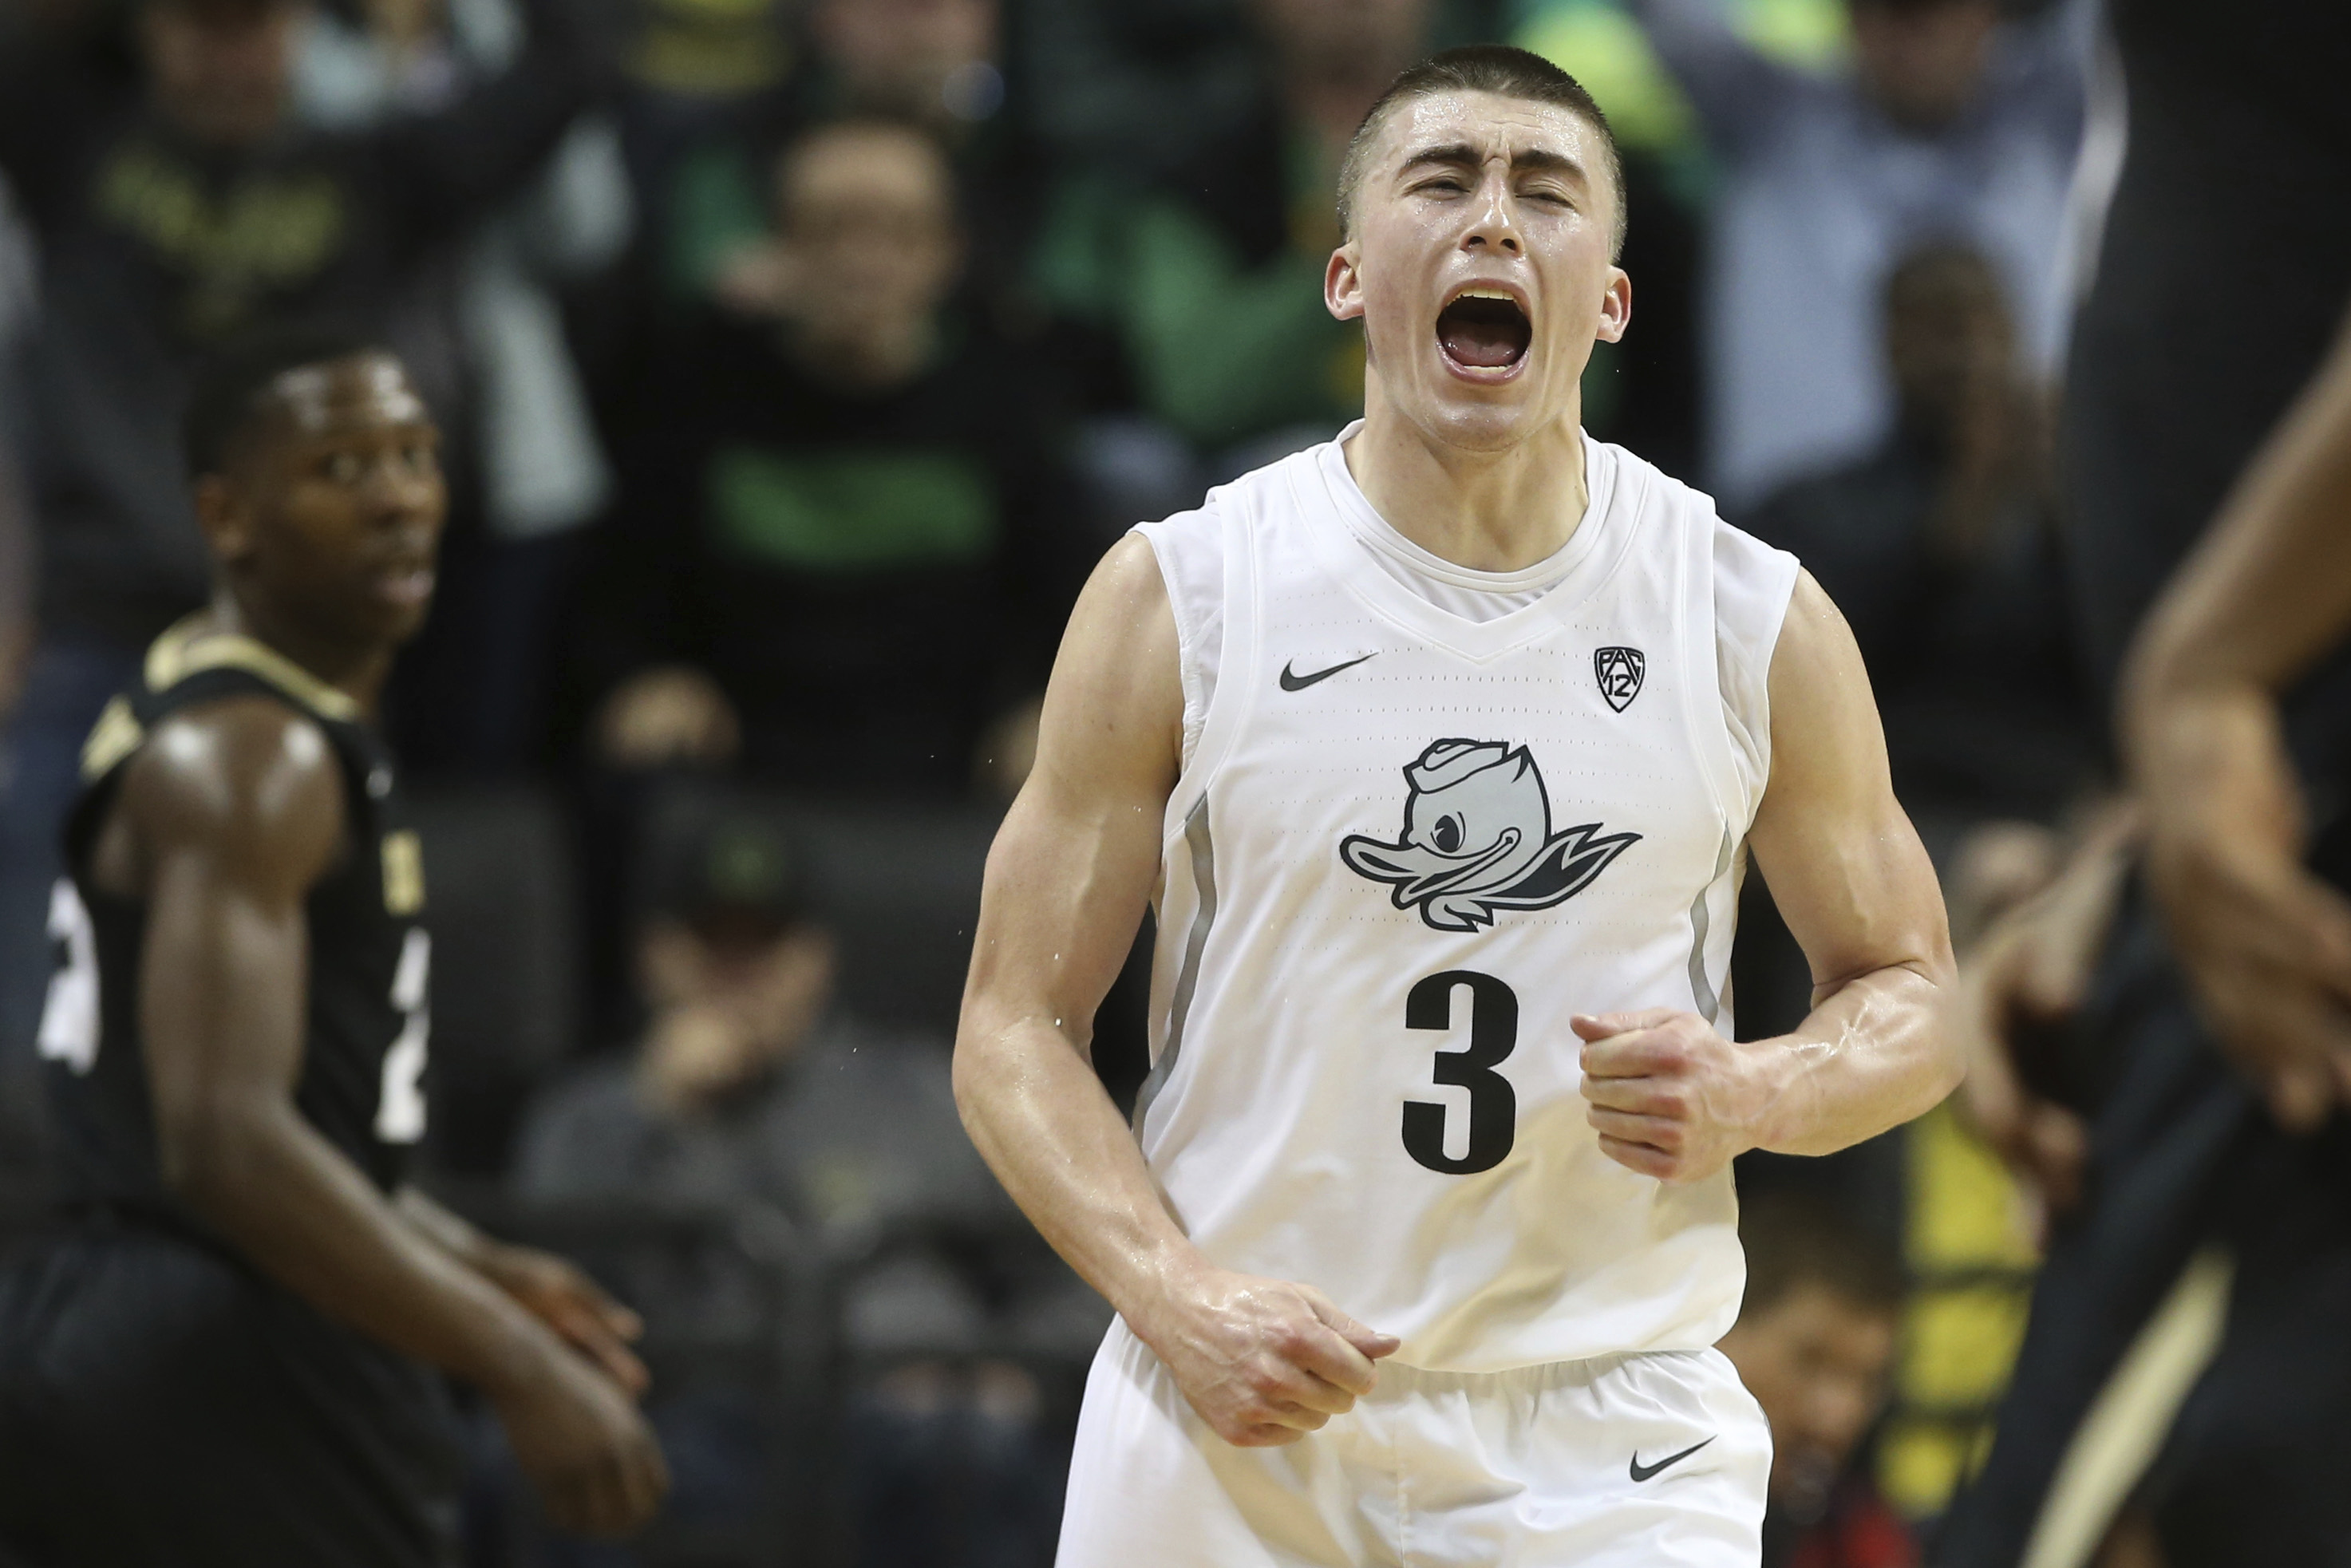 Oregon's Payton Pritchard decided to have some fun and the Ducks